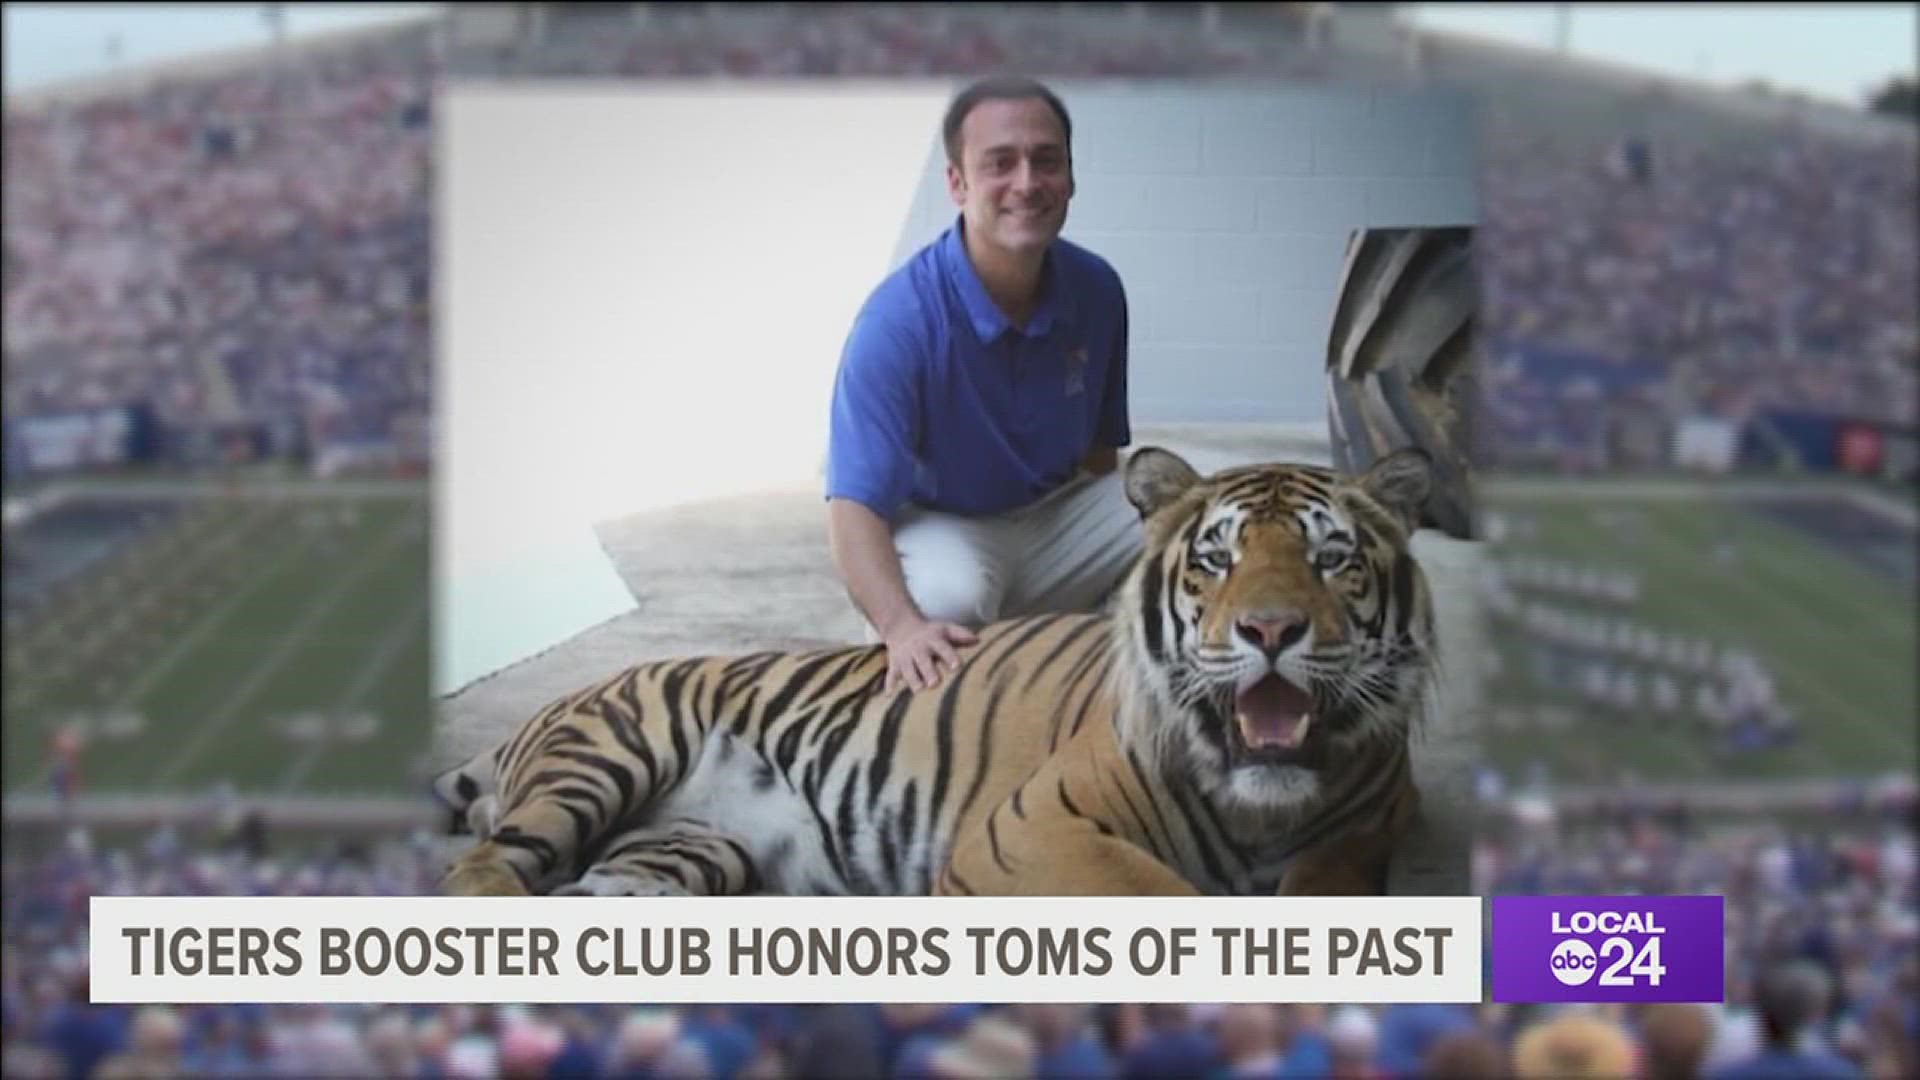 When TOM III passed away suddenly in 2020, the university announced it would mark the end of having a live mascot at games.